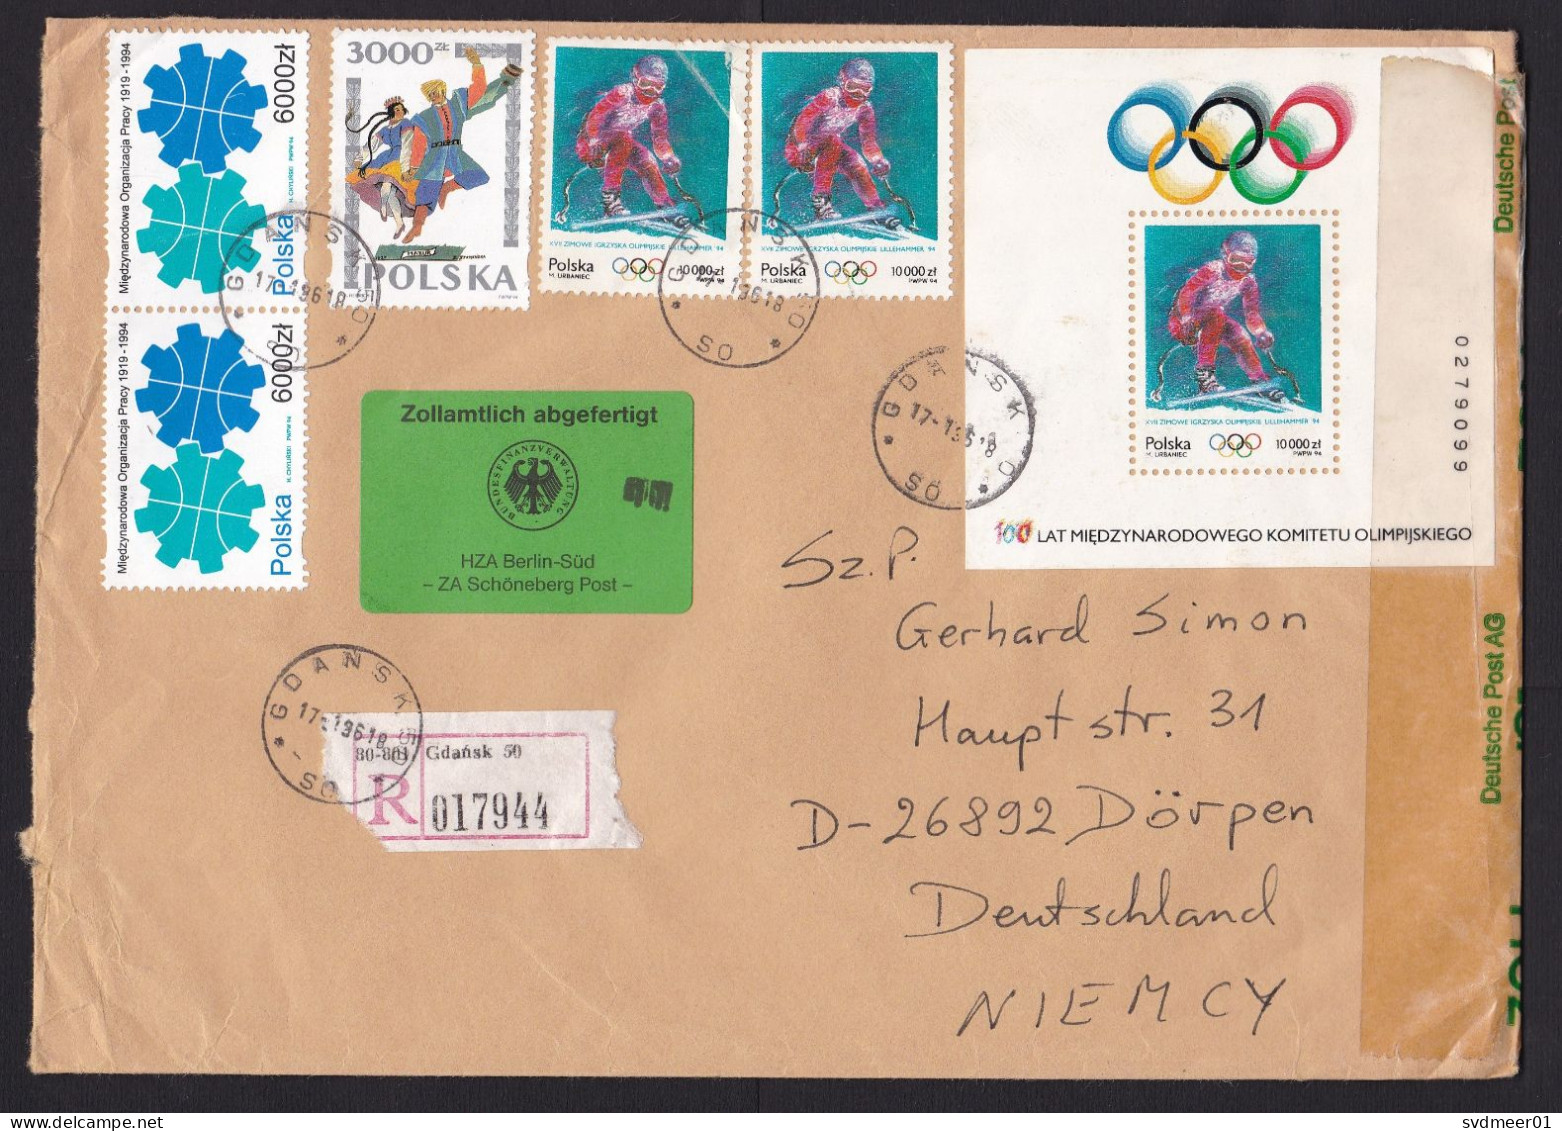 Poland: Registered Cover To Germany, 1996, 6 Stamps, Inflation: 45000 ZL, Olympics, Label Customs Control (minor Damage) - Lettres & Documents